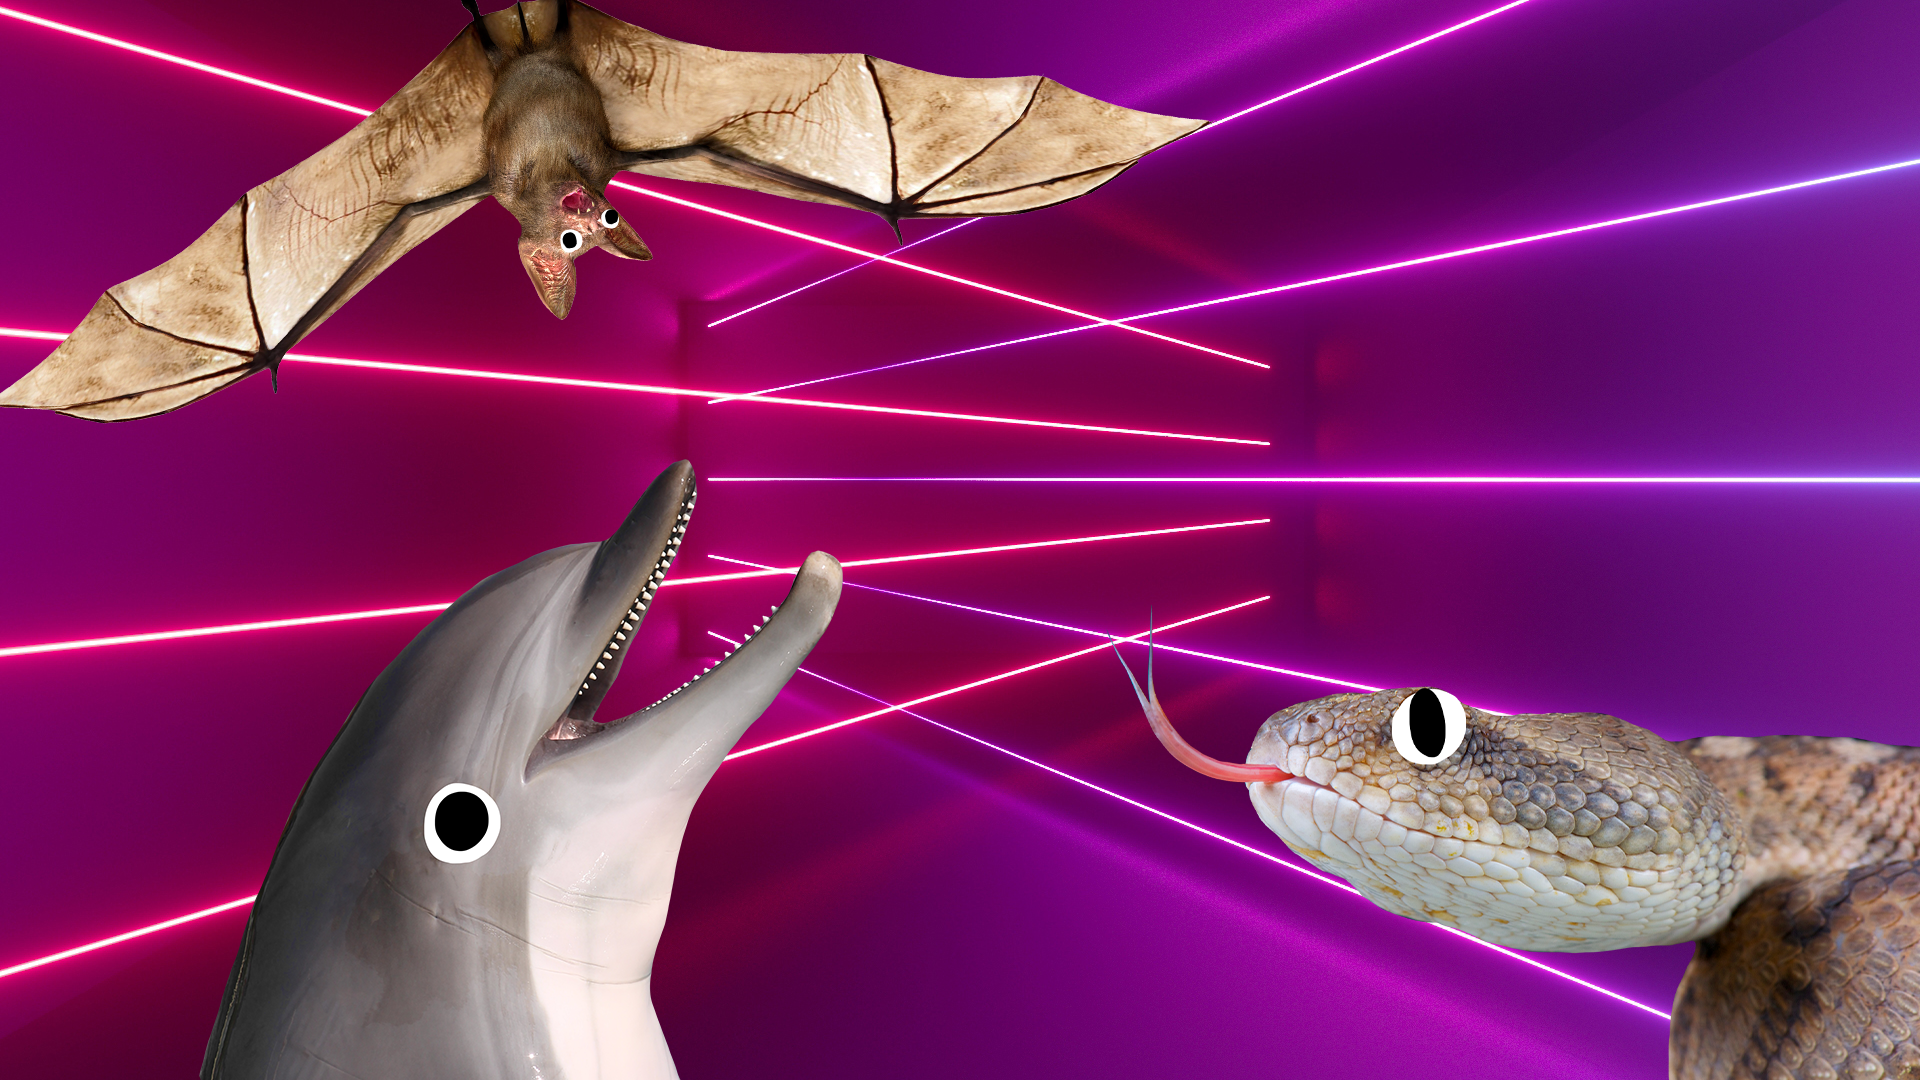 Bat, dolphin and snake on laser background